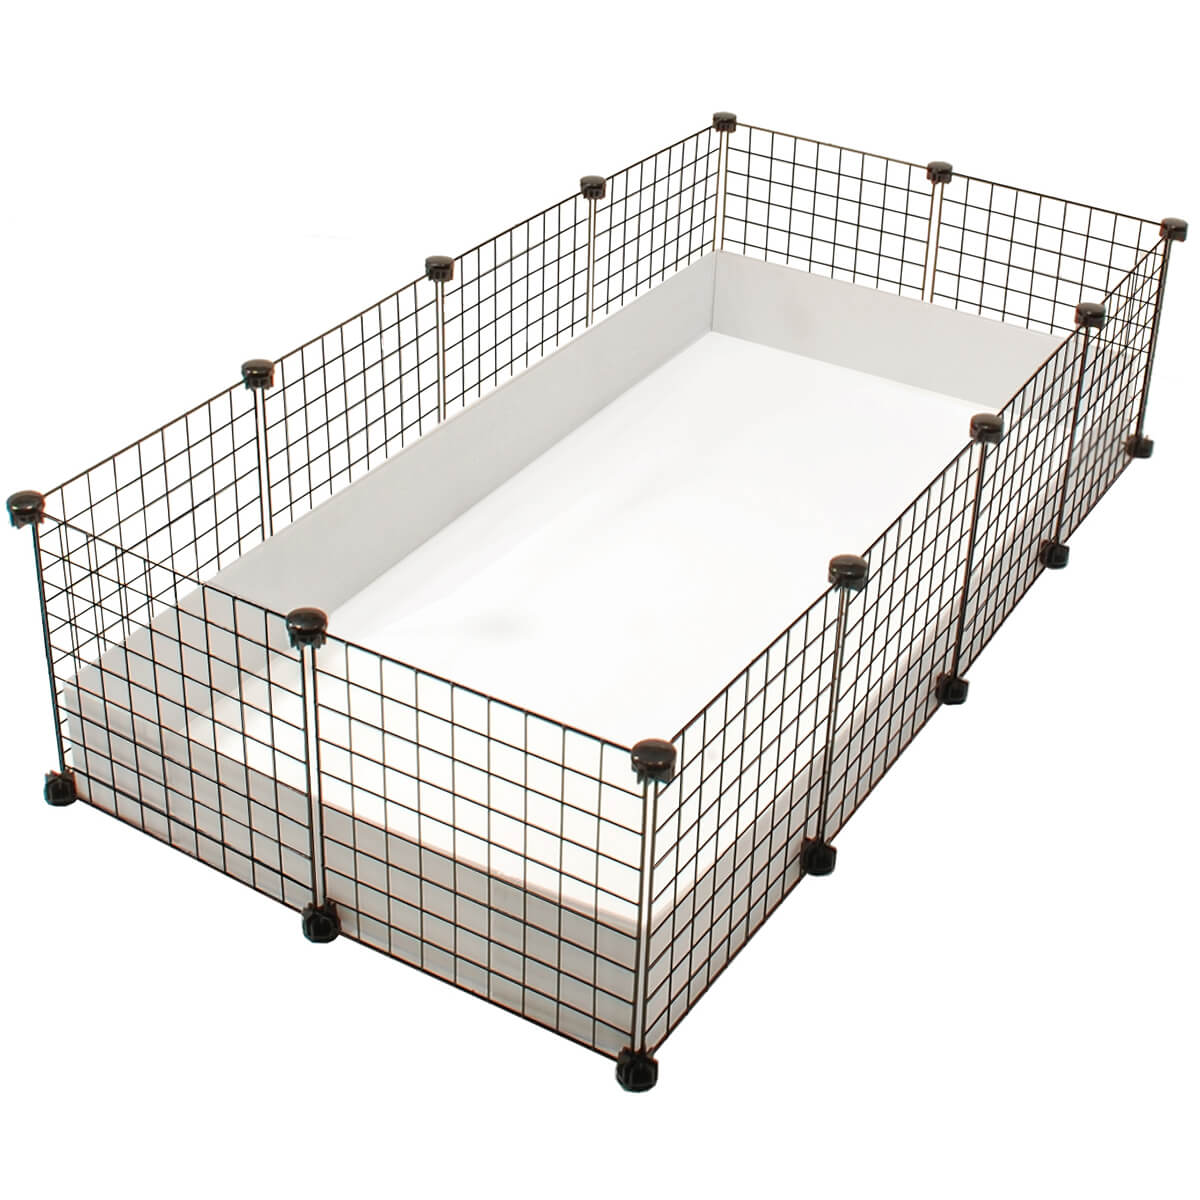 large-2x4-grids-cage-standard-cages-c-c-cages-for-guinea-pigs